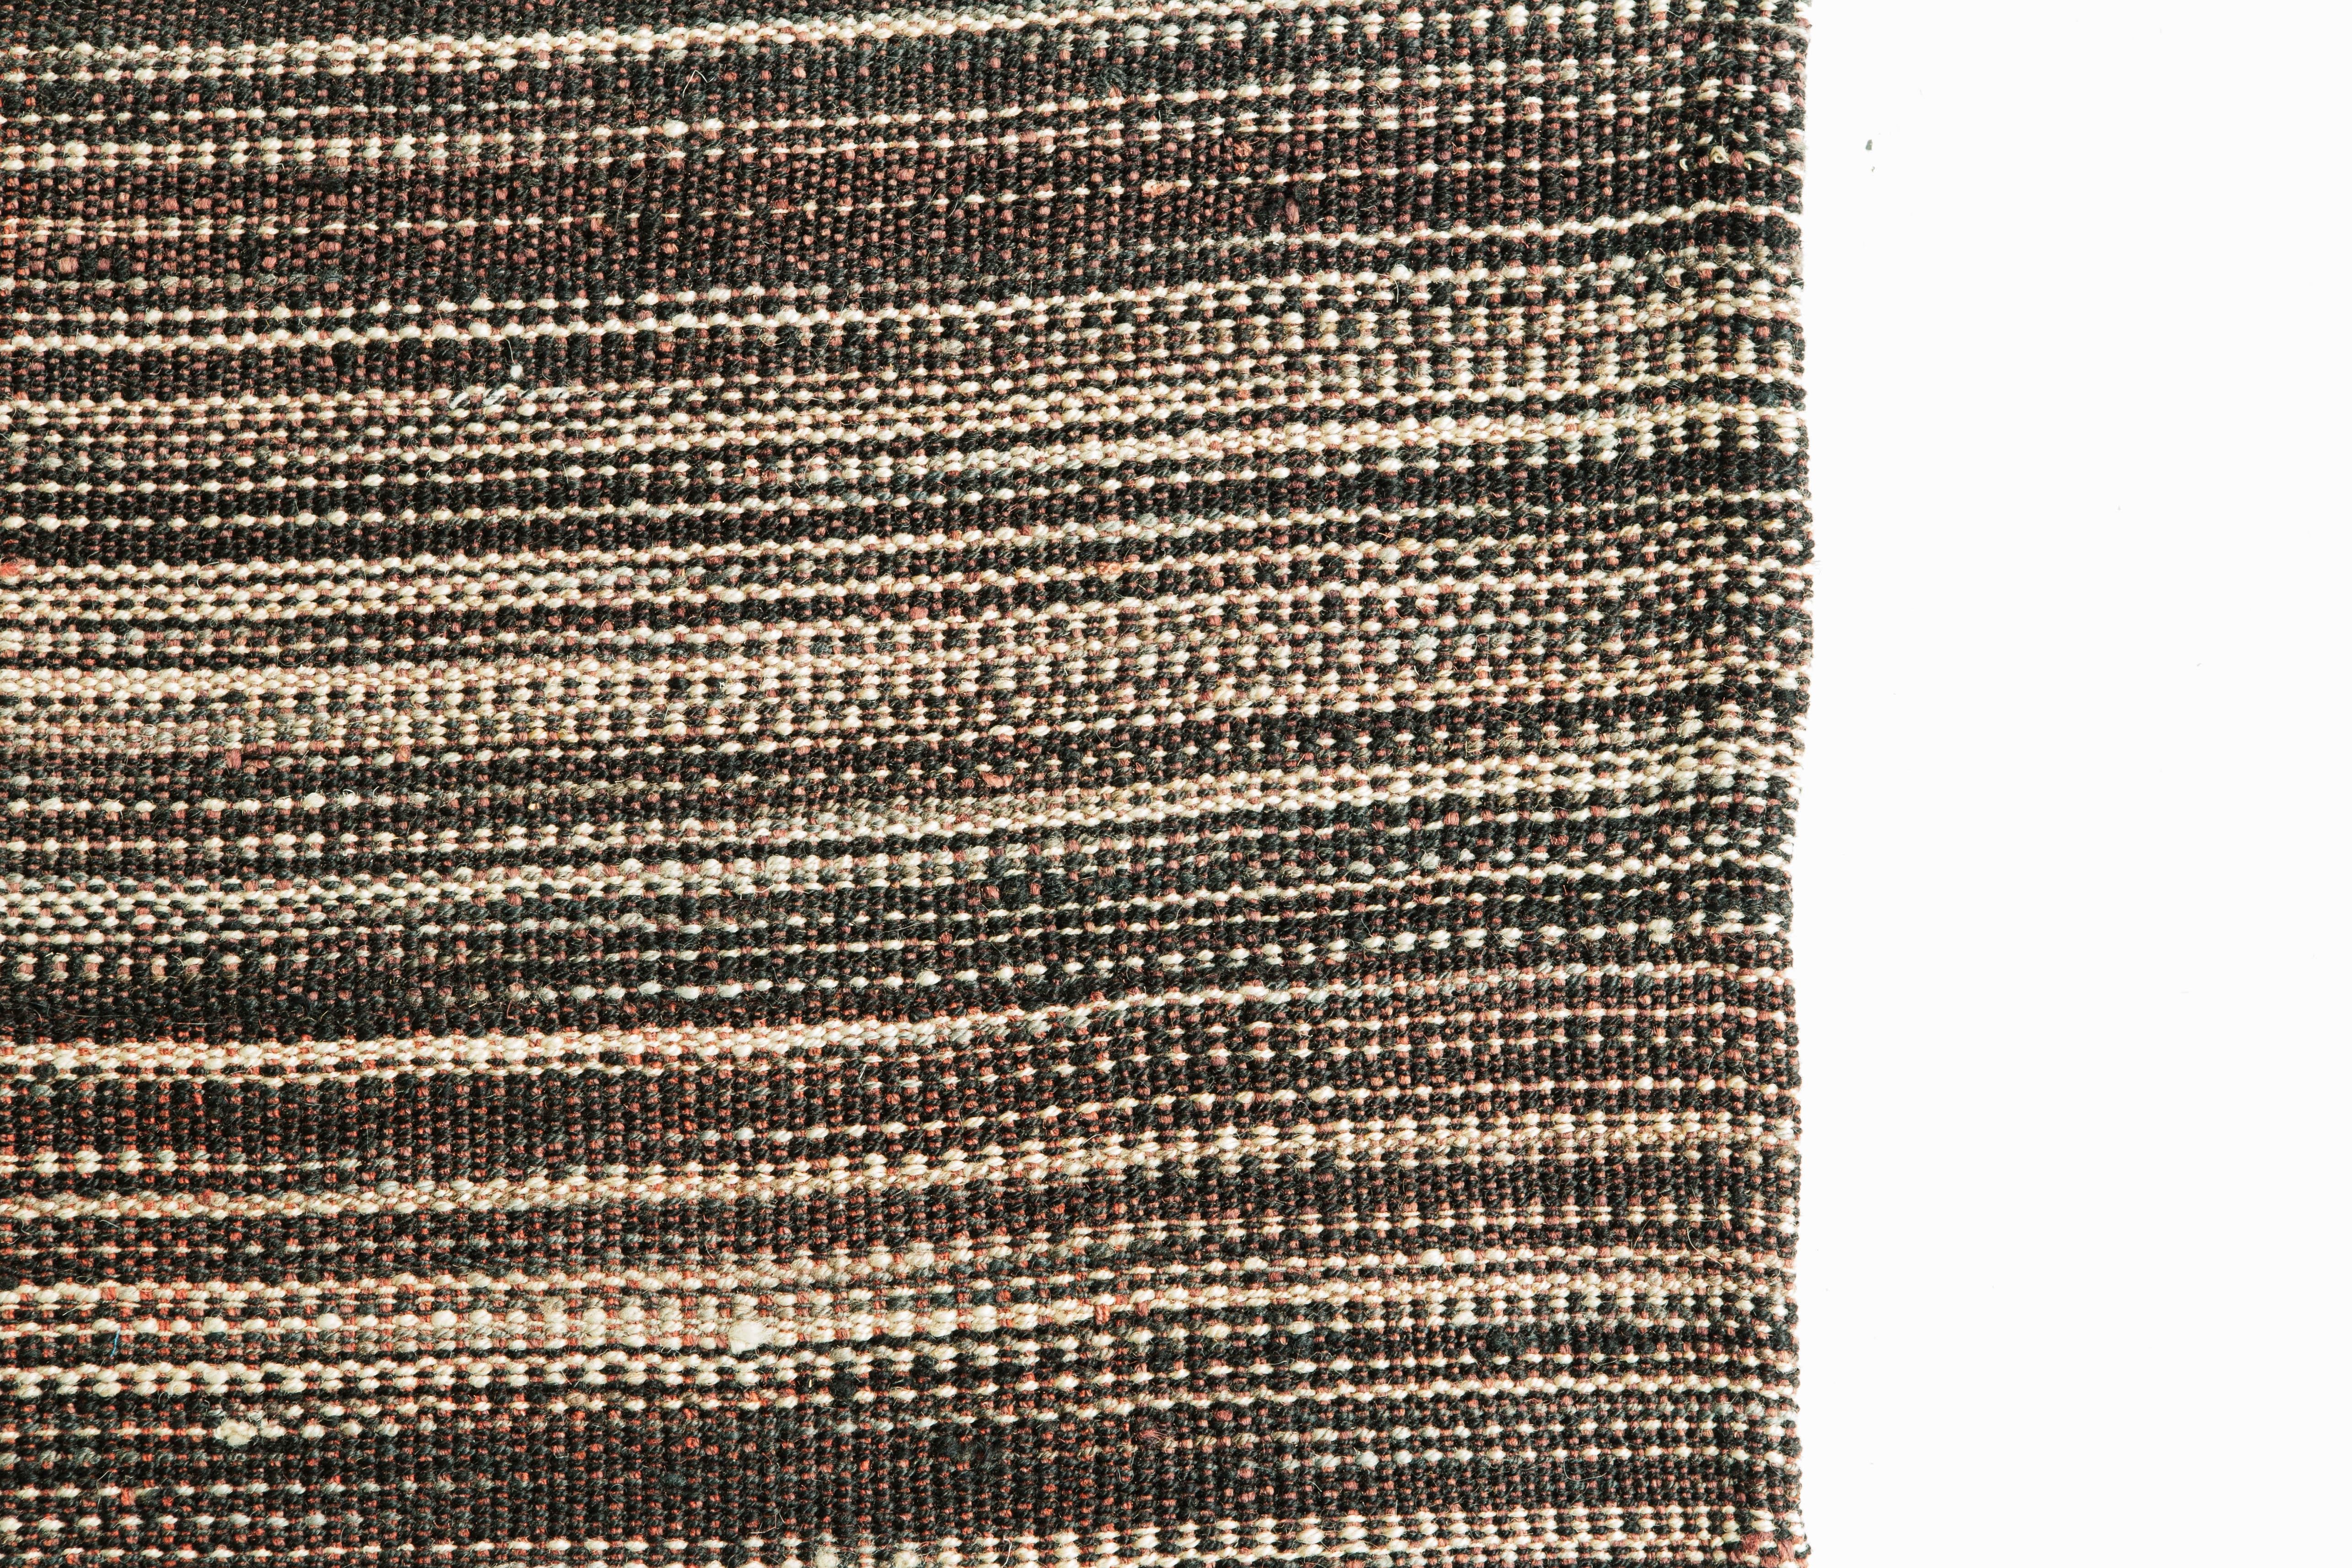 Live life in style with the Kilim flat-weave rug in dark brown and neutral colors. It is simple yet accommodating, making it an excellent rug for any design space.

Rug number: 26247
Size: 8' 5